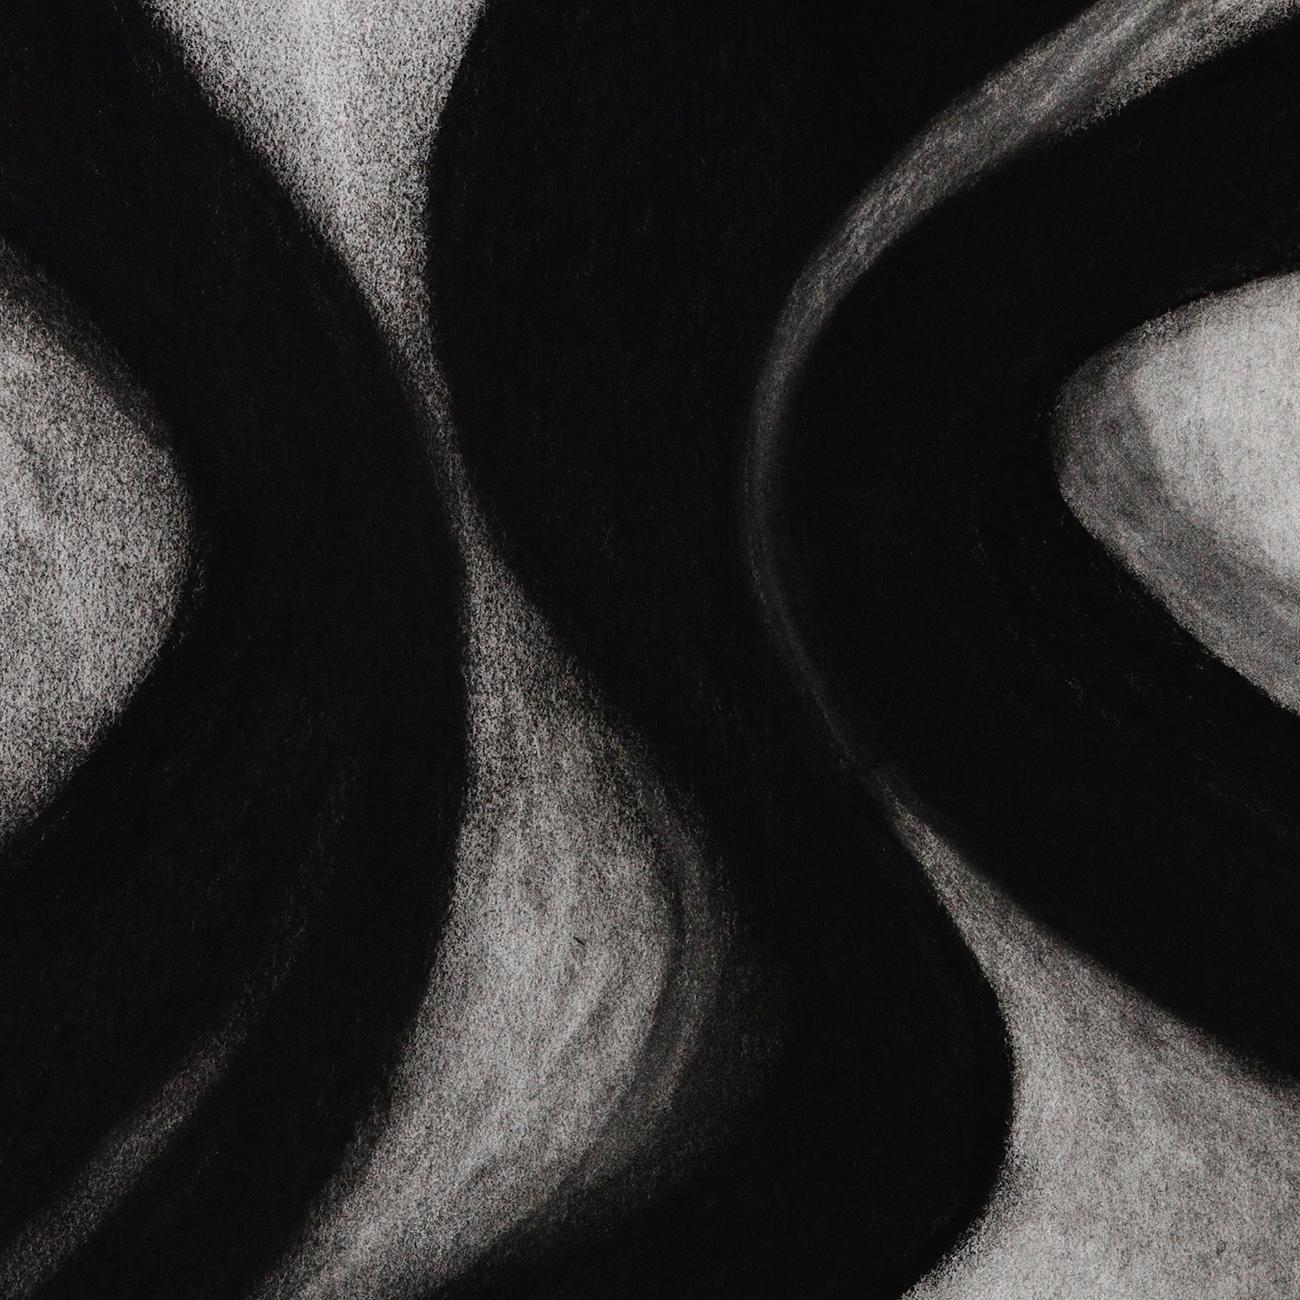 Dovetail small 2 (Abstract drawing)
Charcoal on paper - Unframed.

